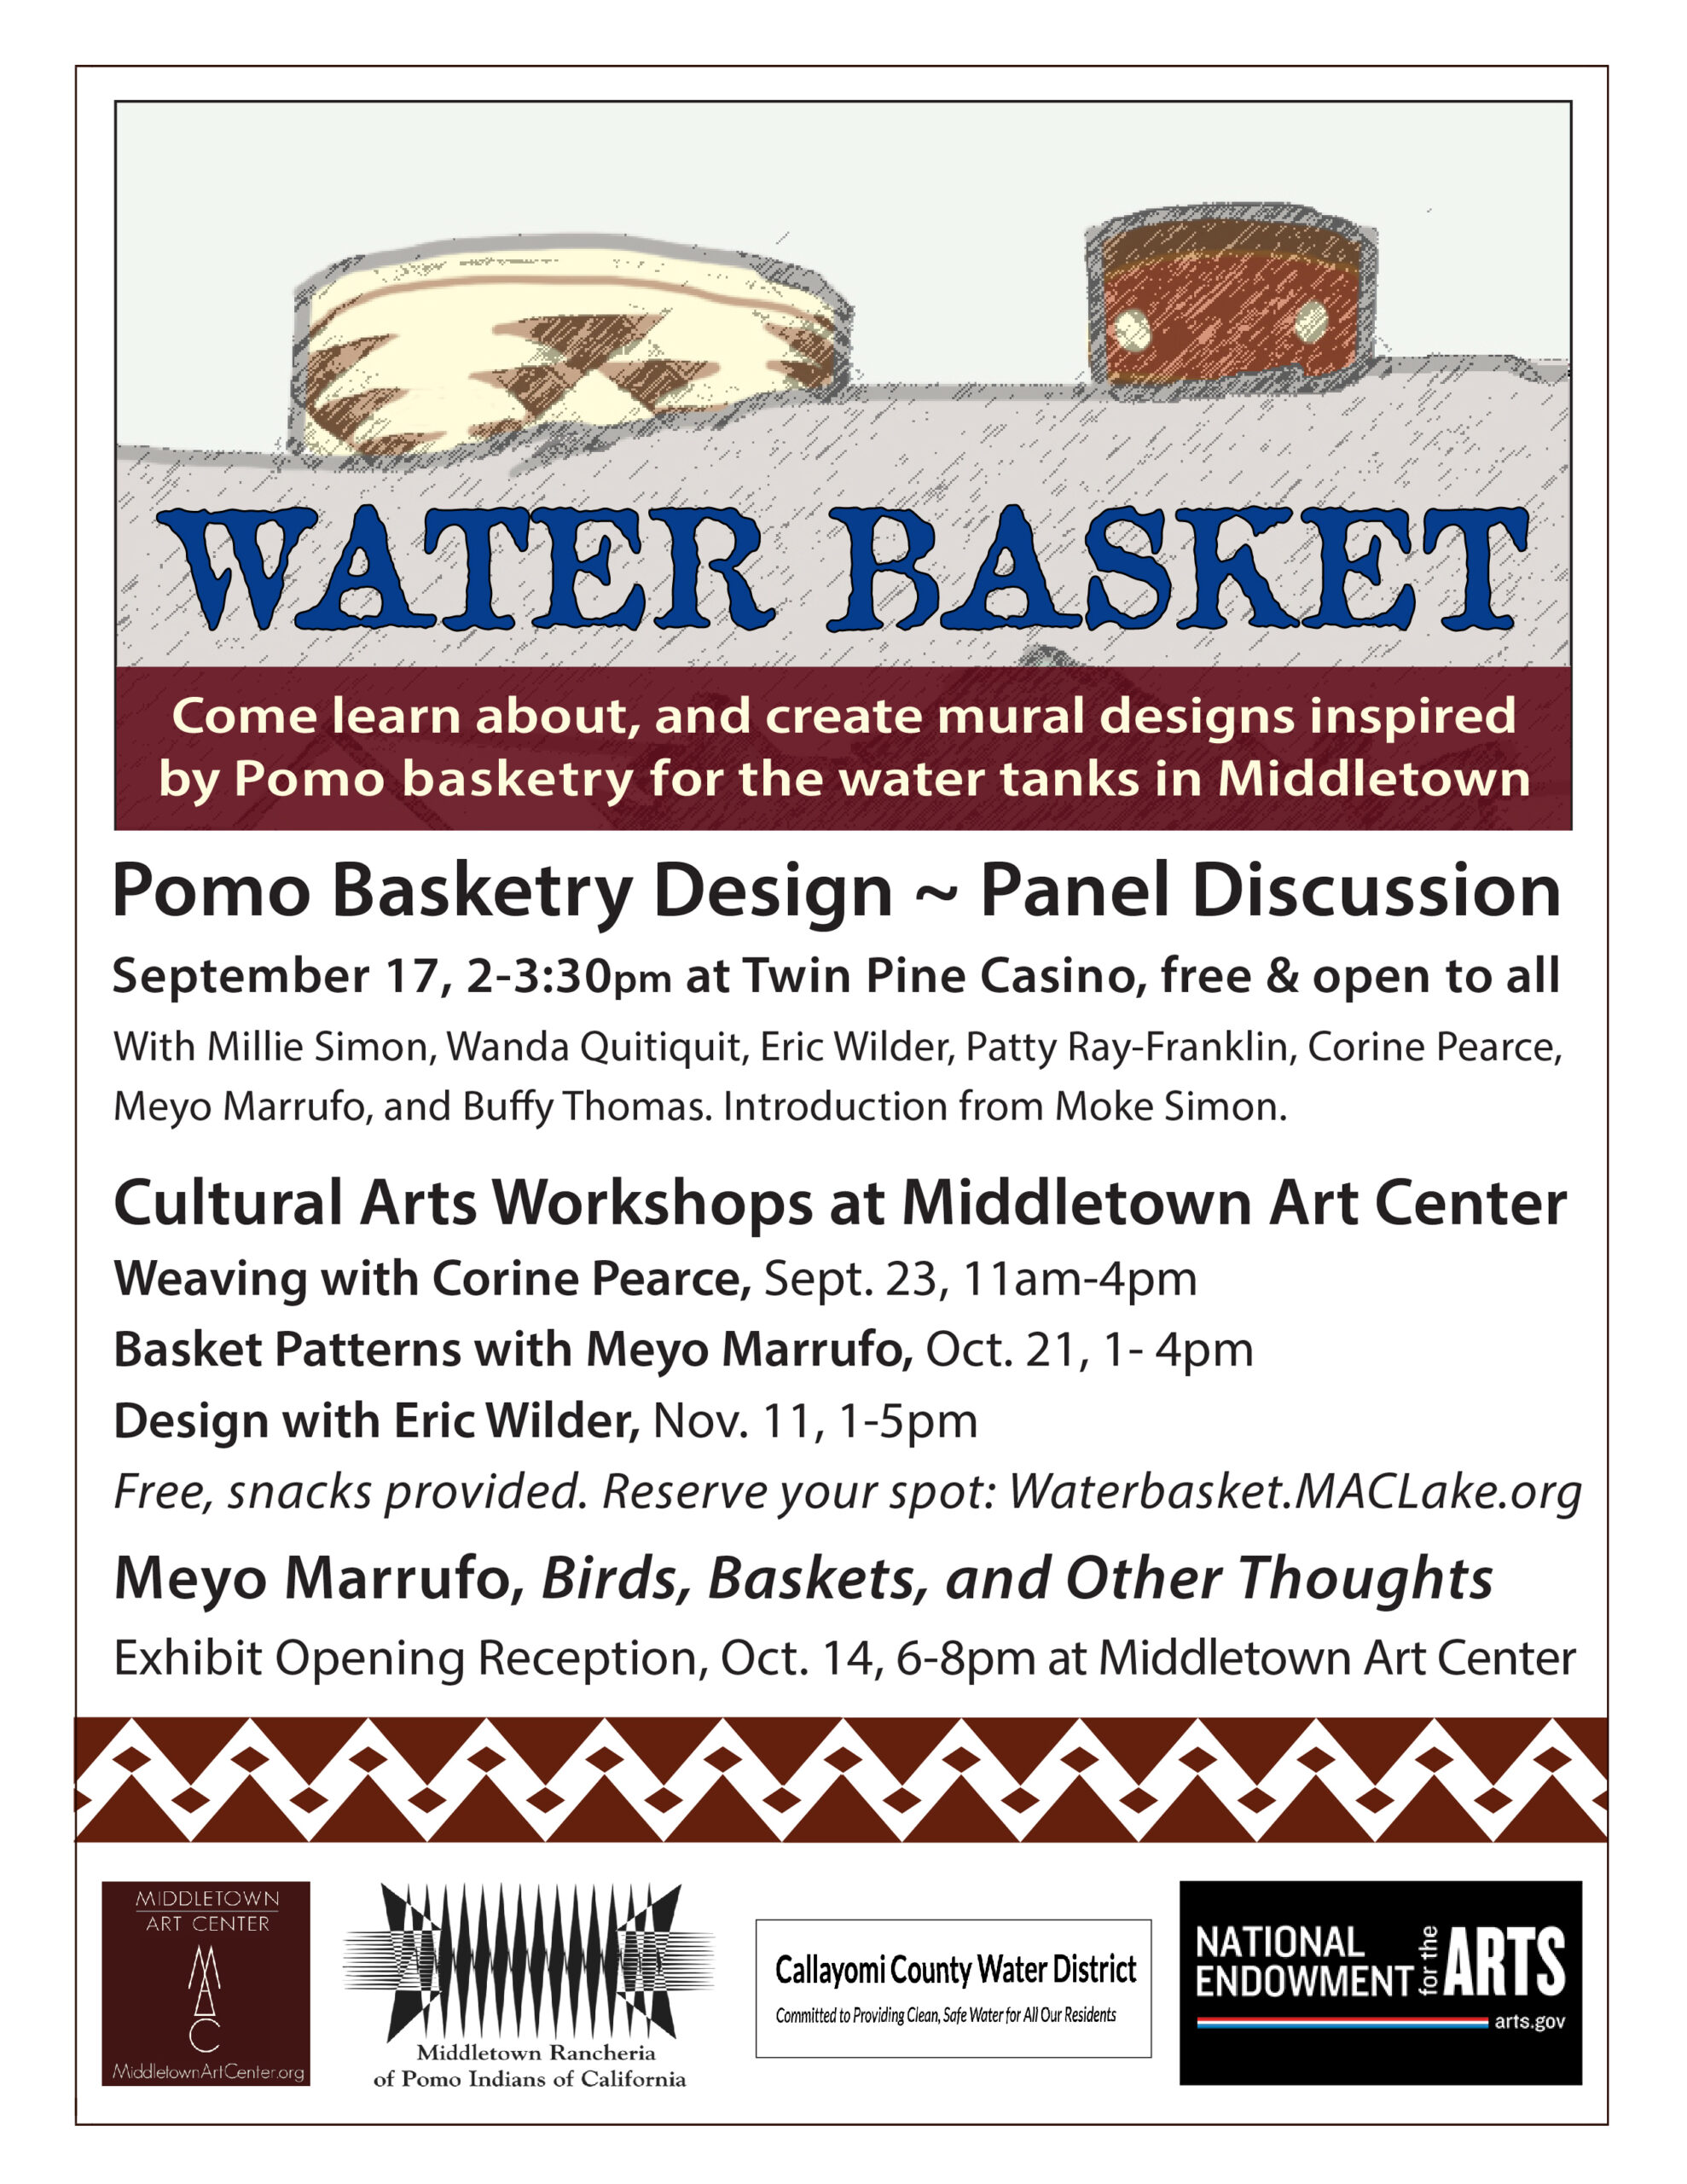 Water Basket Event!